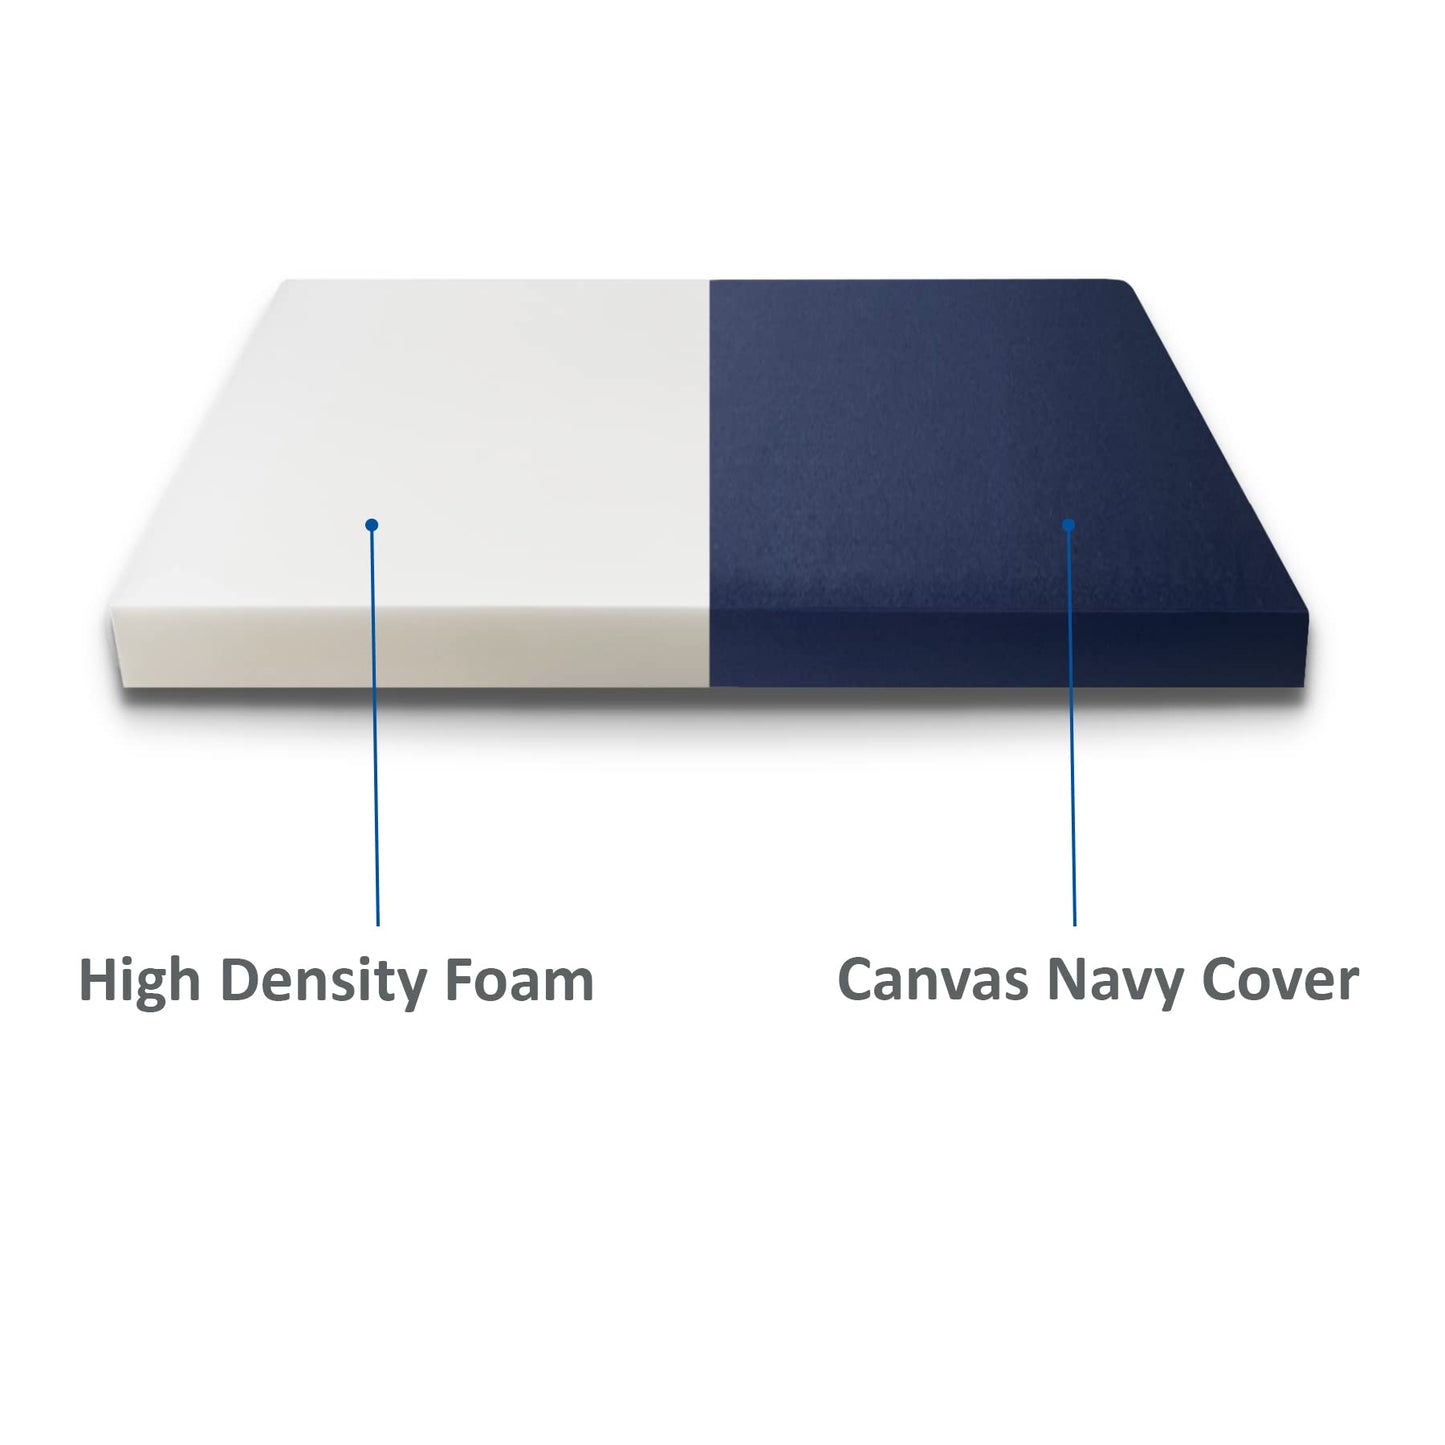 FoamRush 10" Olympic Queen (66" x 80") High Density Foam RV Mattress Replacement W/Canvas Navy Cover, Extra Firm, Made in USA, Camper Trailer, Removable Water-Resistant Outdoor/Indoor Cover W/Zip